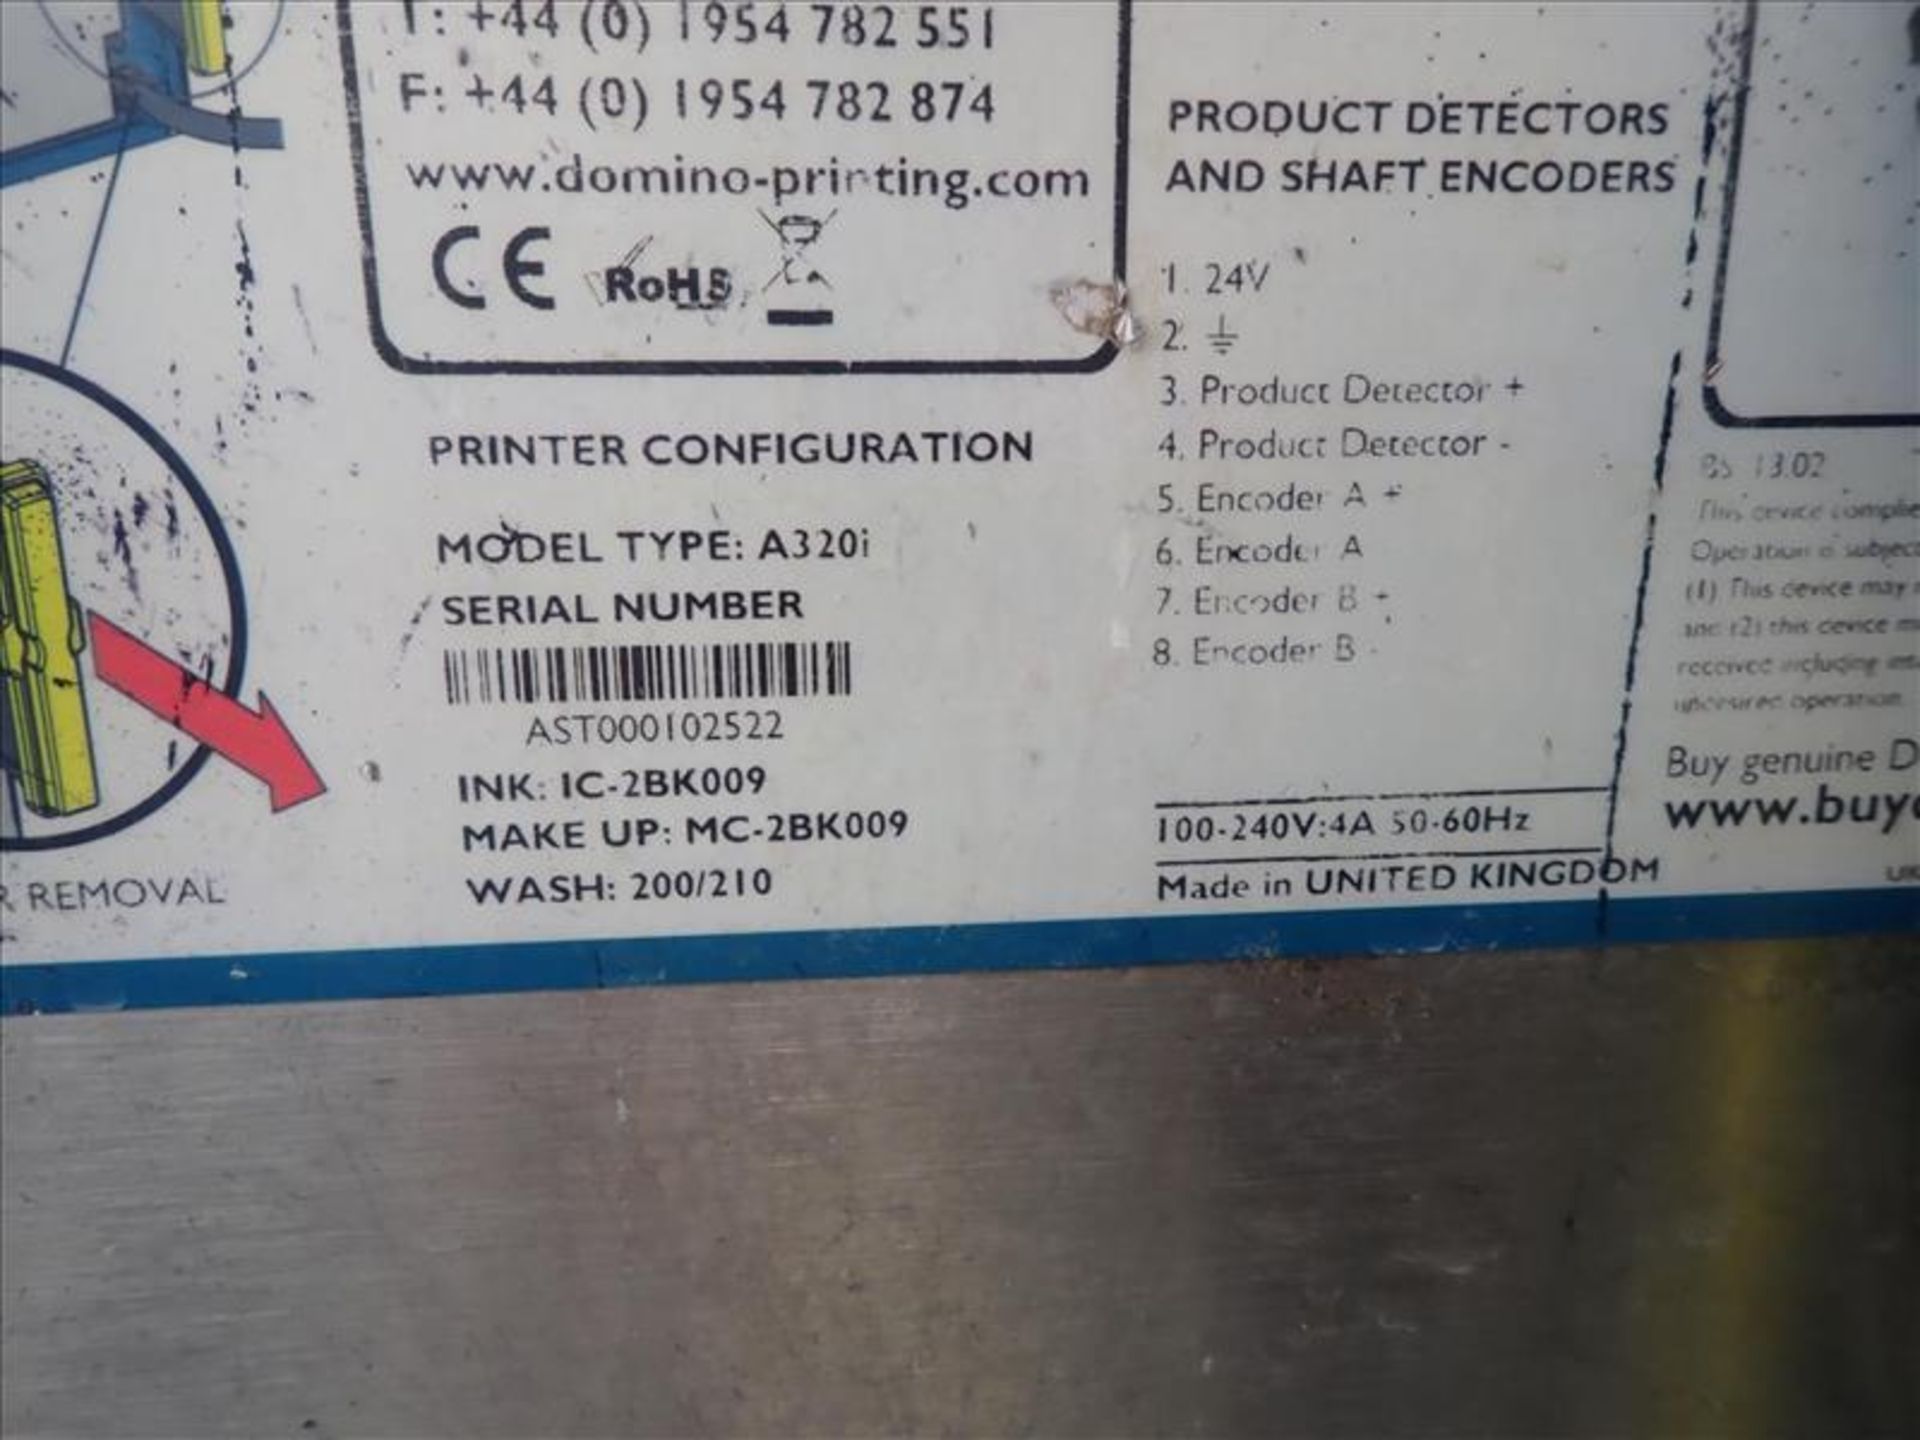 Domino inkjet printer/coder, mod. A320i, ser. no. AST000102552, stainless steel w/ print head and - Image 3 of 3